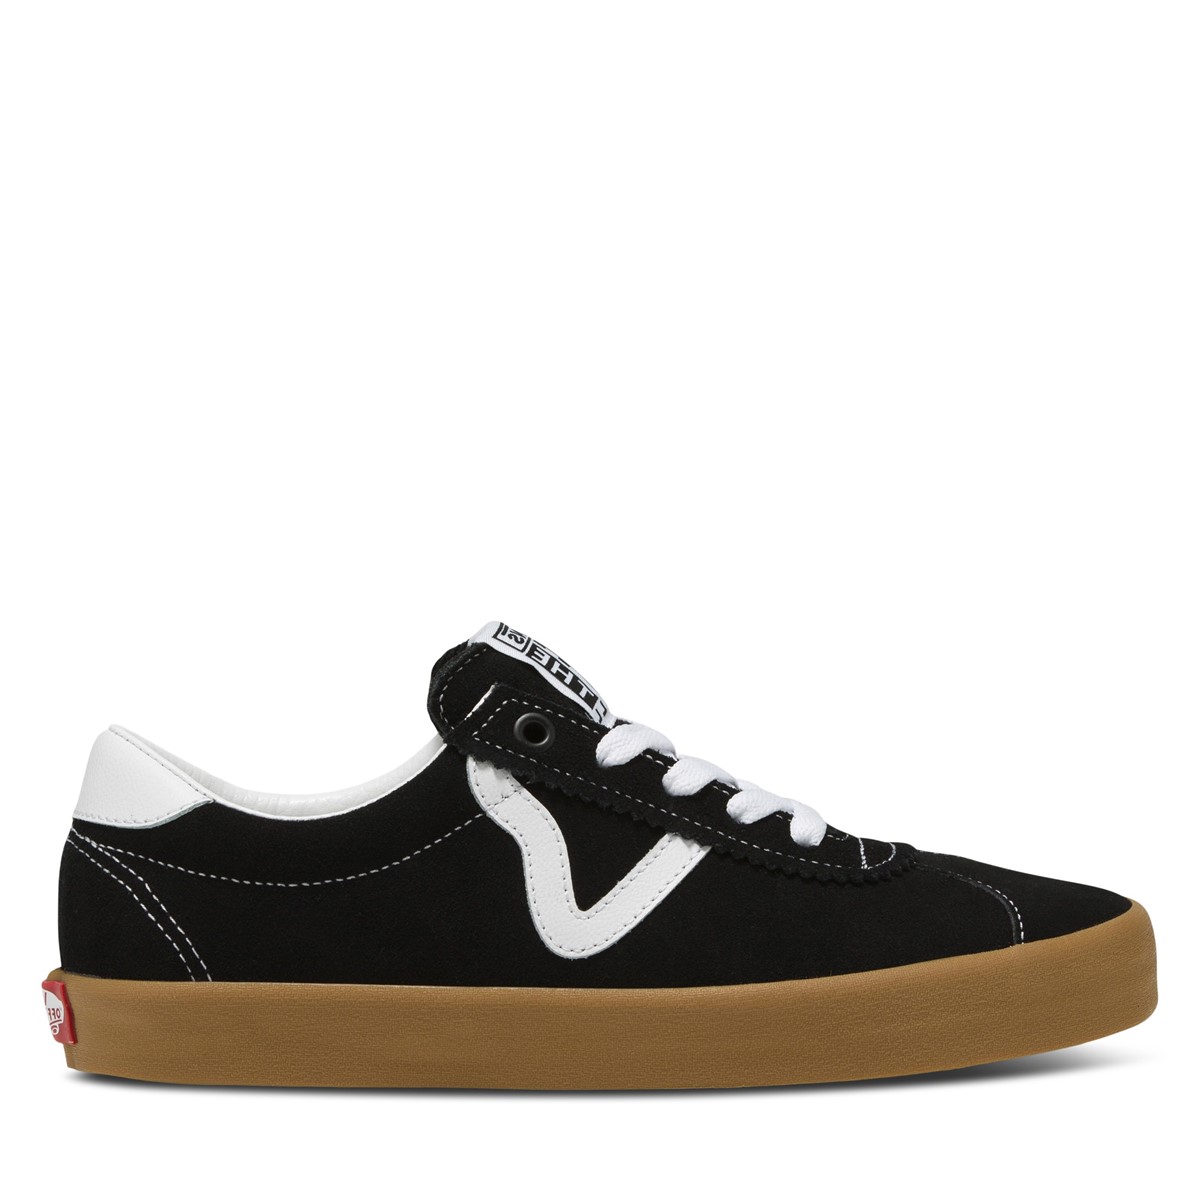 Sports Low Sneakers in Black/White/Gum